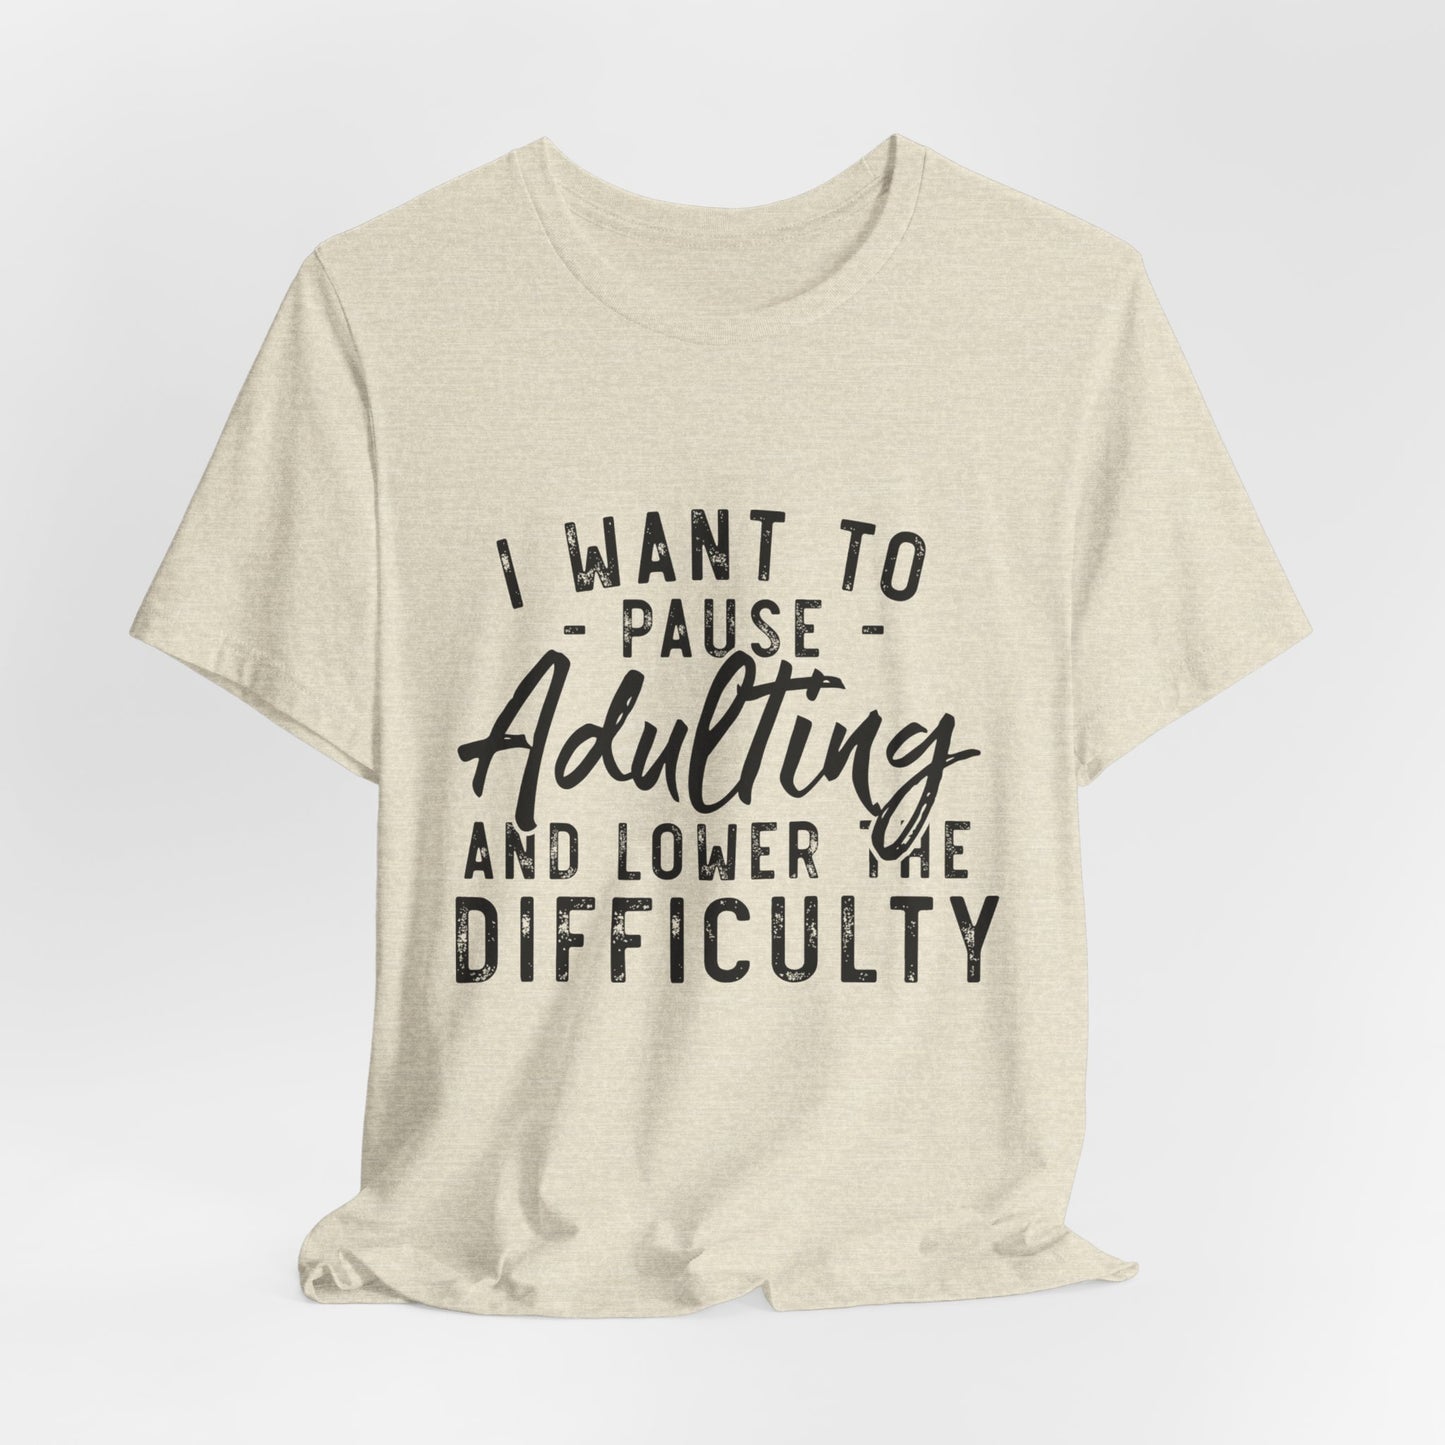 Pause Adulting Women's Funny Short Sleeve Tshirt